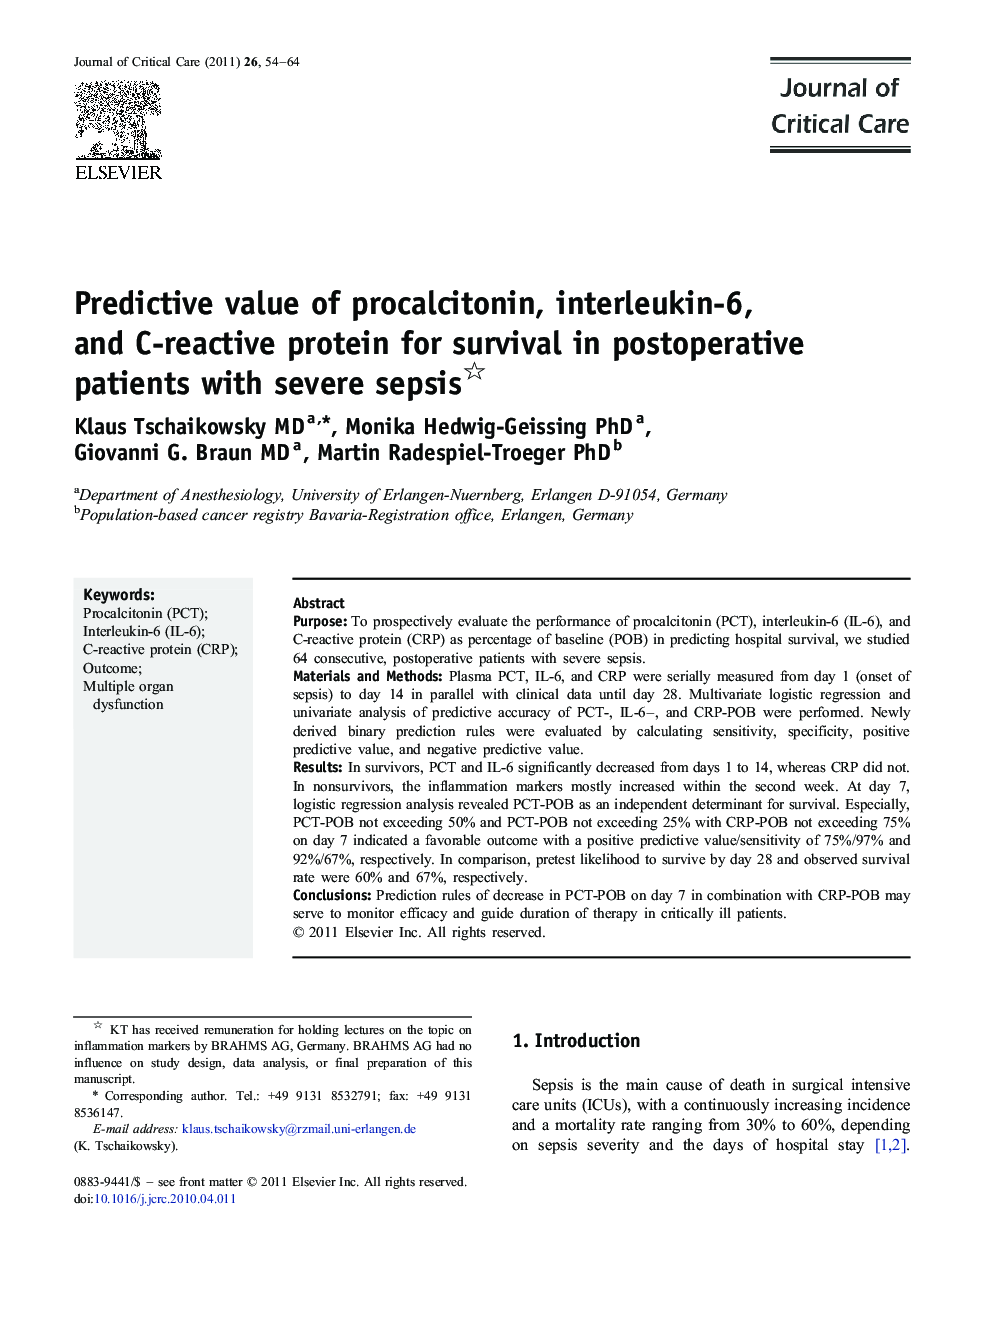 Predictive value of procalcitonin, interleukin-6, and C-reactive protein for survival in postoperative patients with severe sepsis 